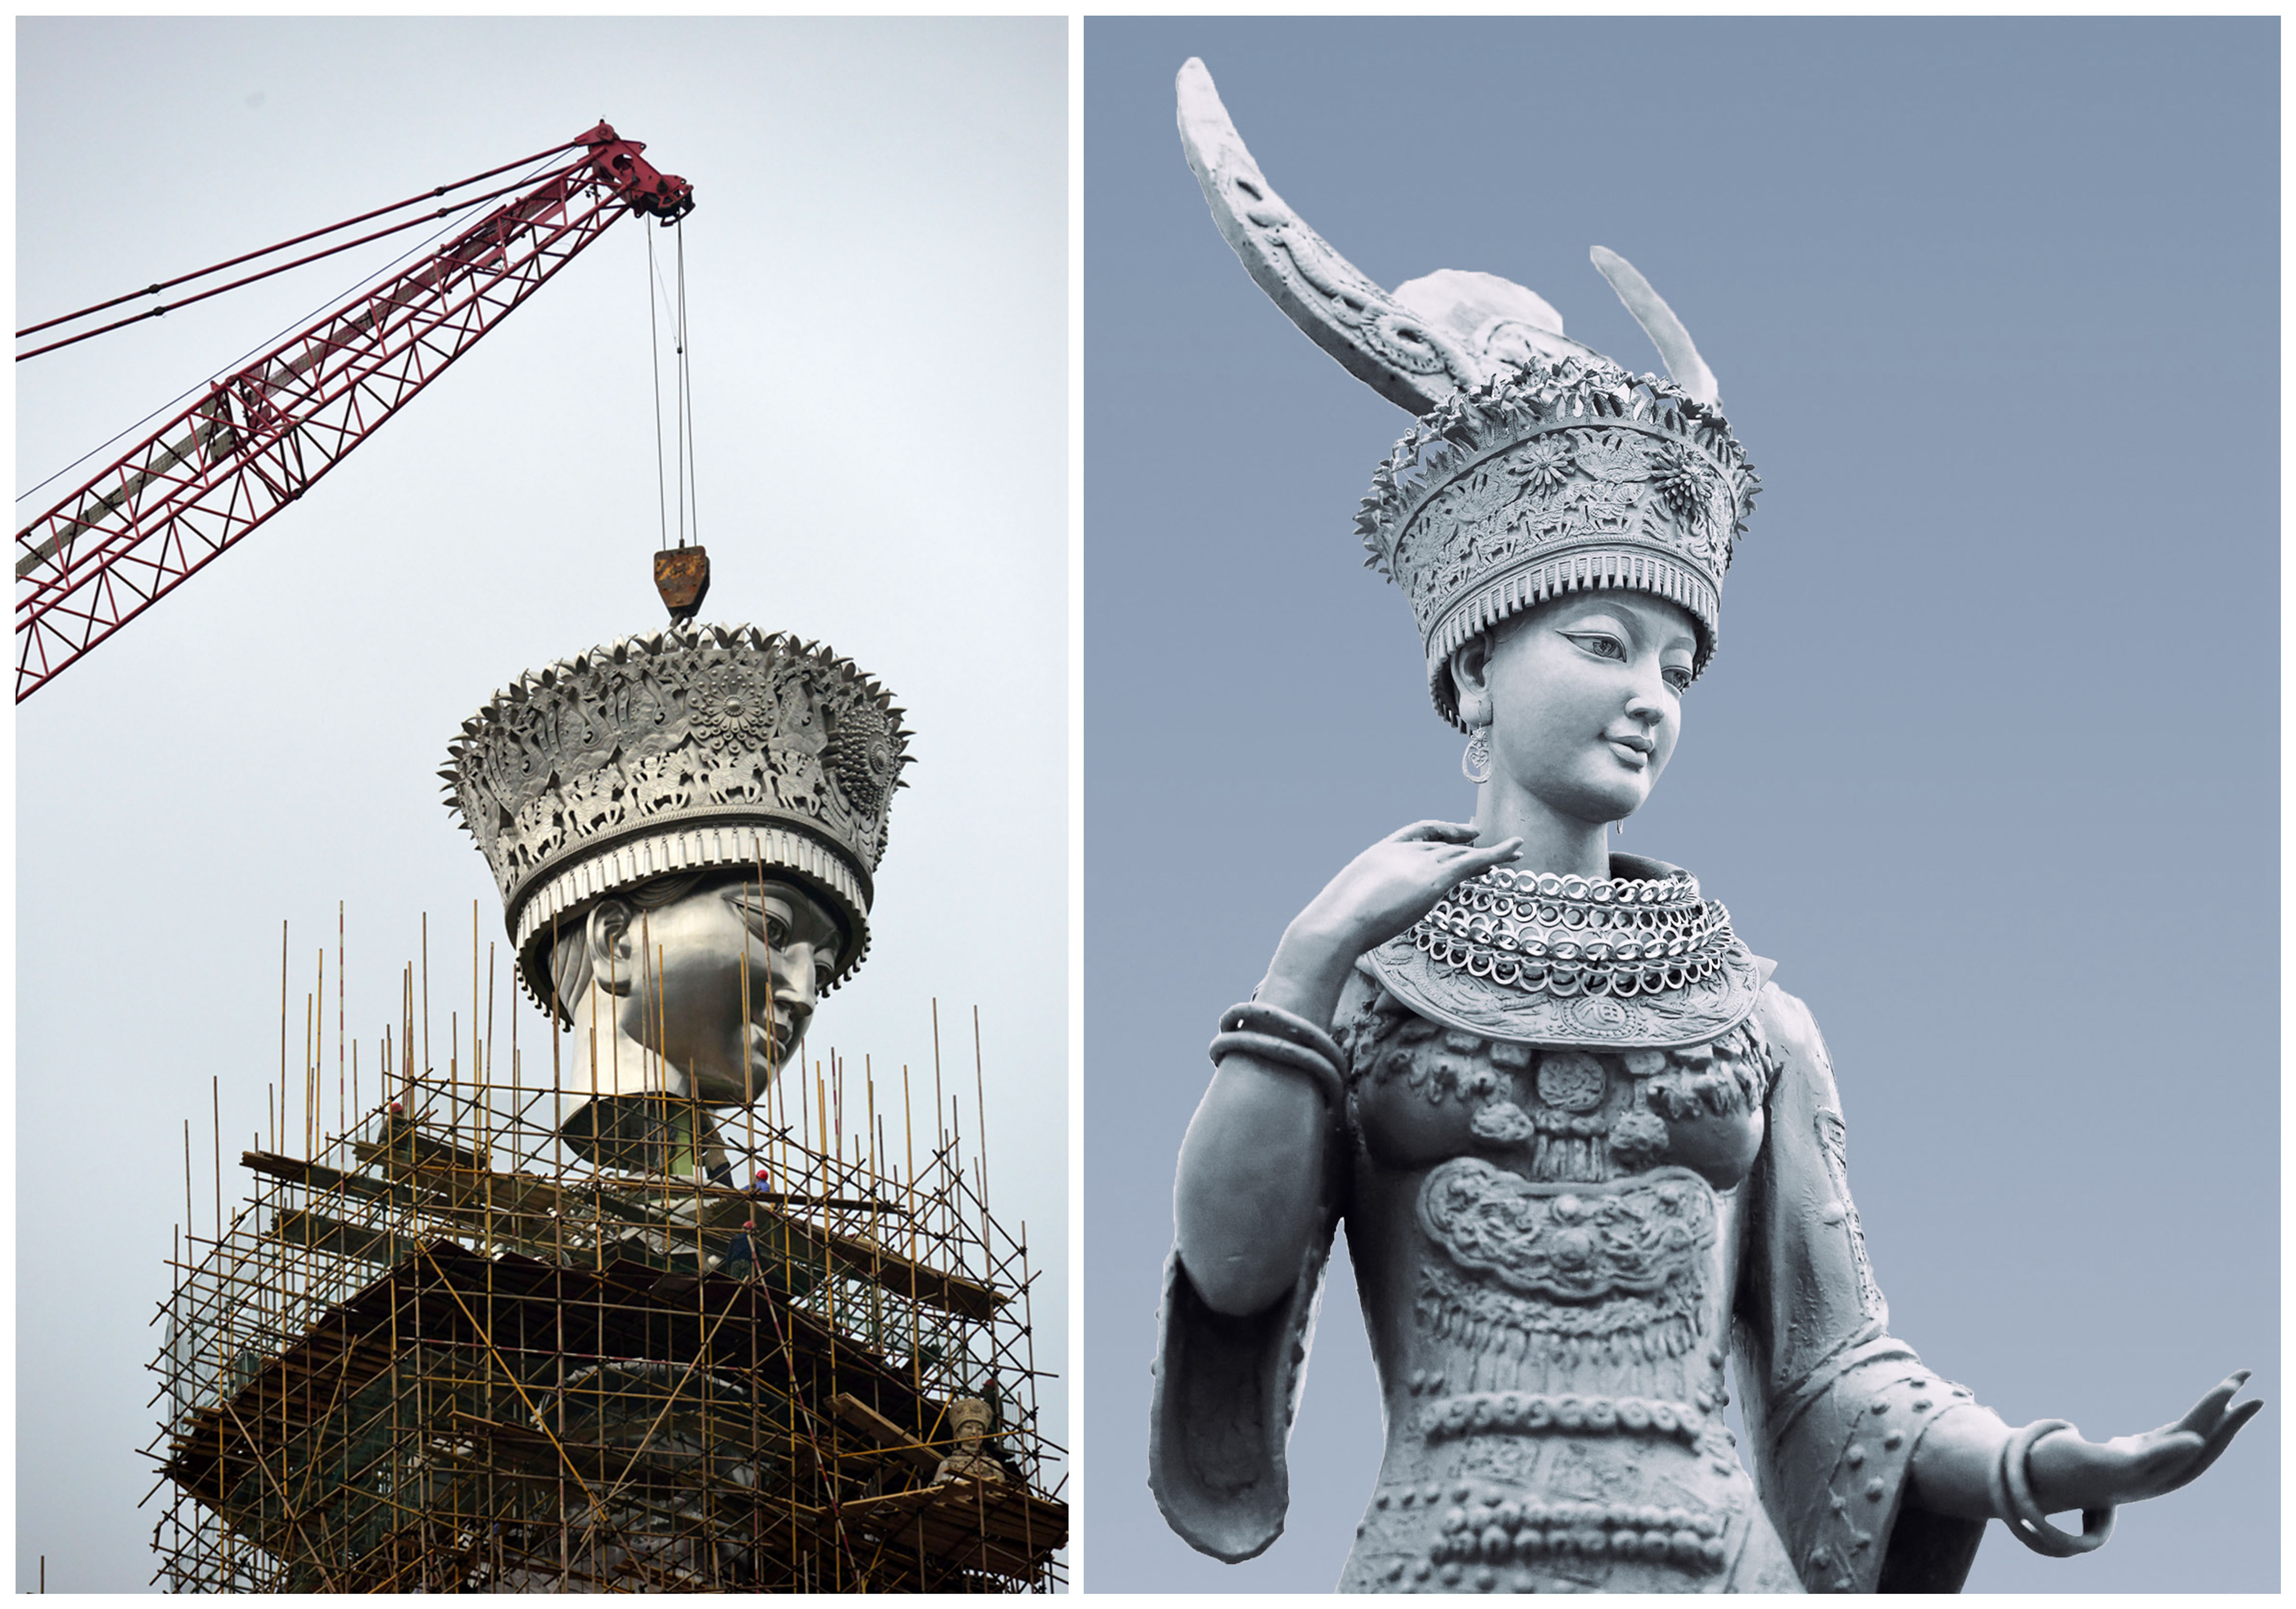 A statue of the Goddess of Beauty is being built in China